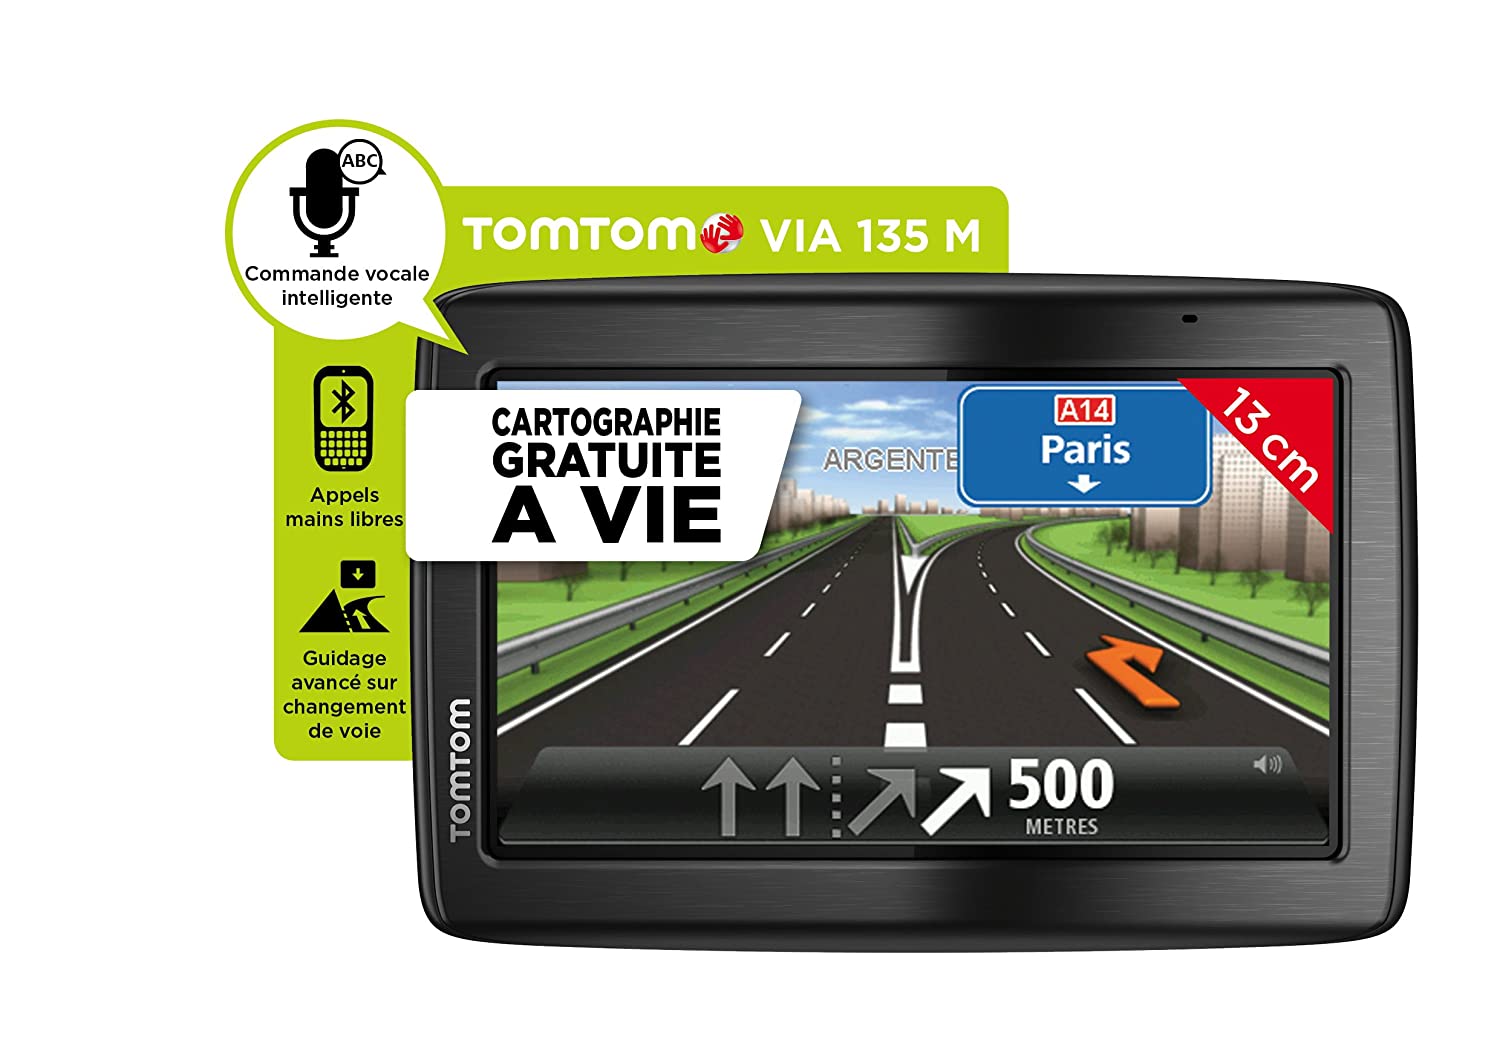 where does tomtom mydrive connect download maps